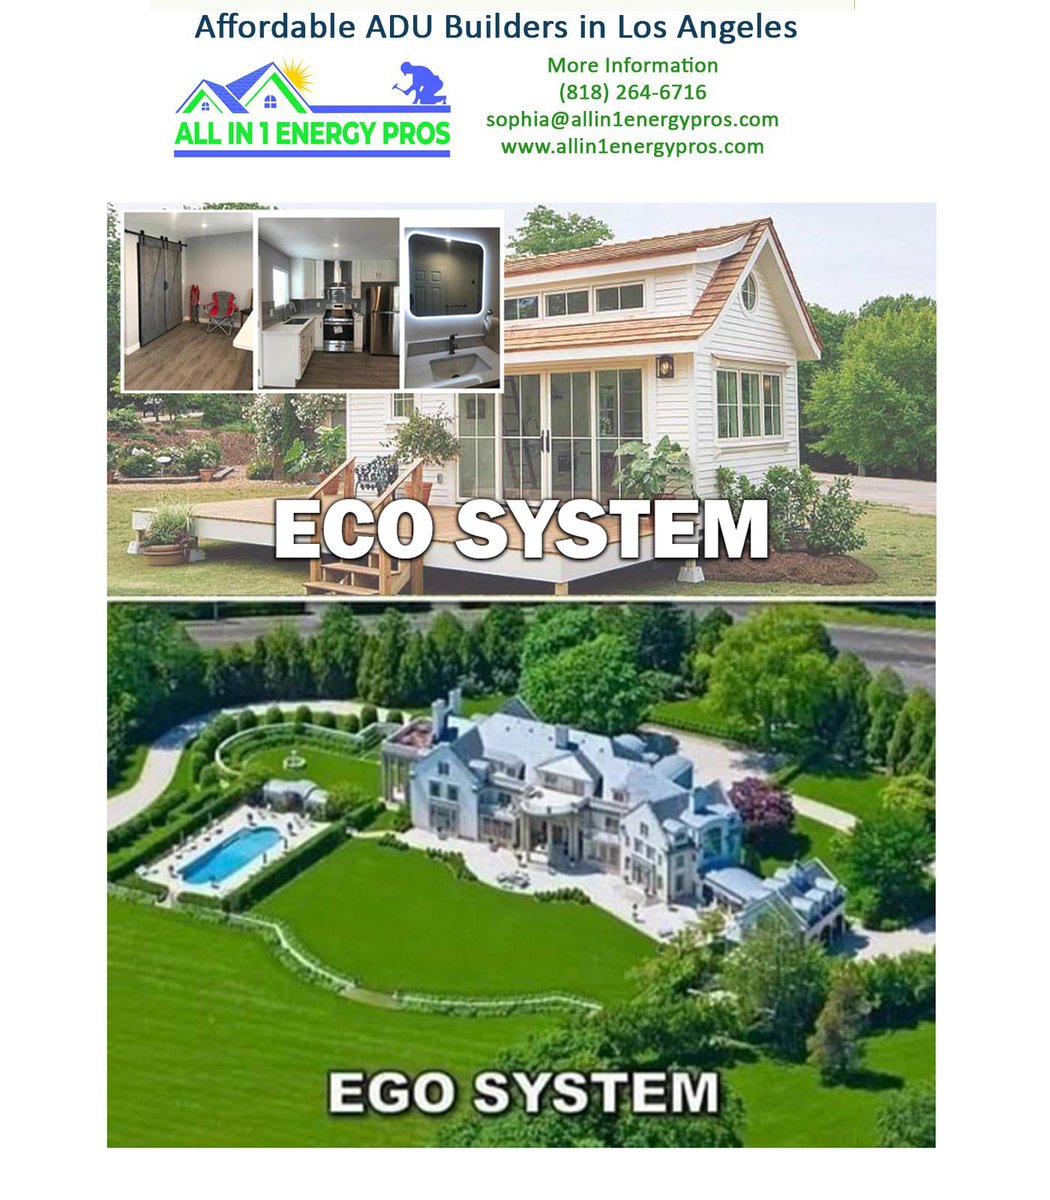 Less is MORE ...

All in One Energy Pros offers affordable #ADU, #solarpanelinstallation & Energy-Efficient #Roofing in #LosAngeles  🏡

allin1energypros.com

#AccessoryDwellingUnit #minimalism #frugal #simplicity #OffGrid #TinyHomes #LA #California #housing #affordablehousing